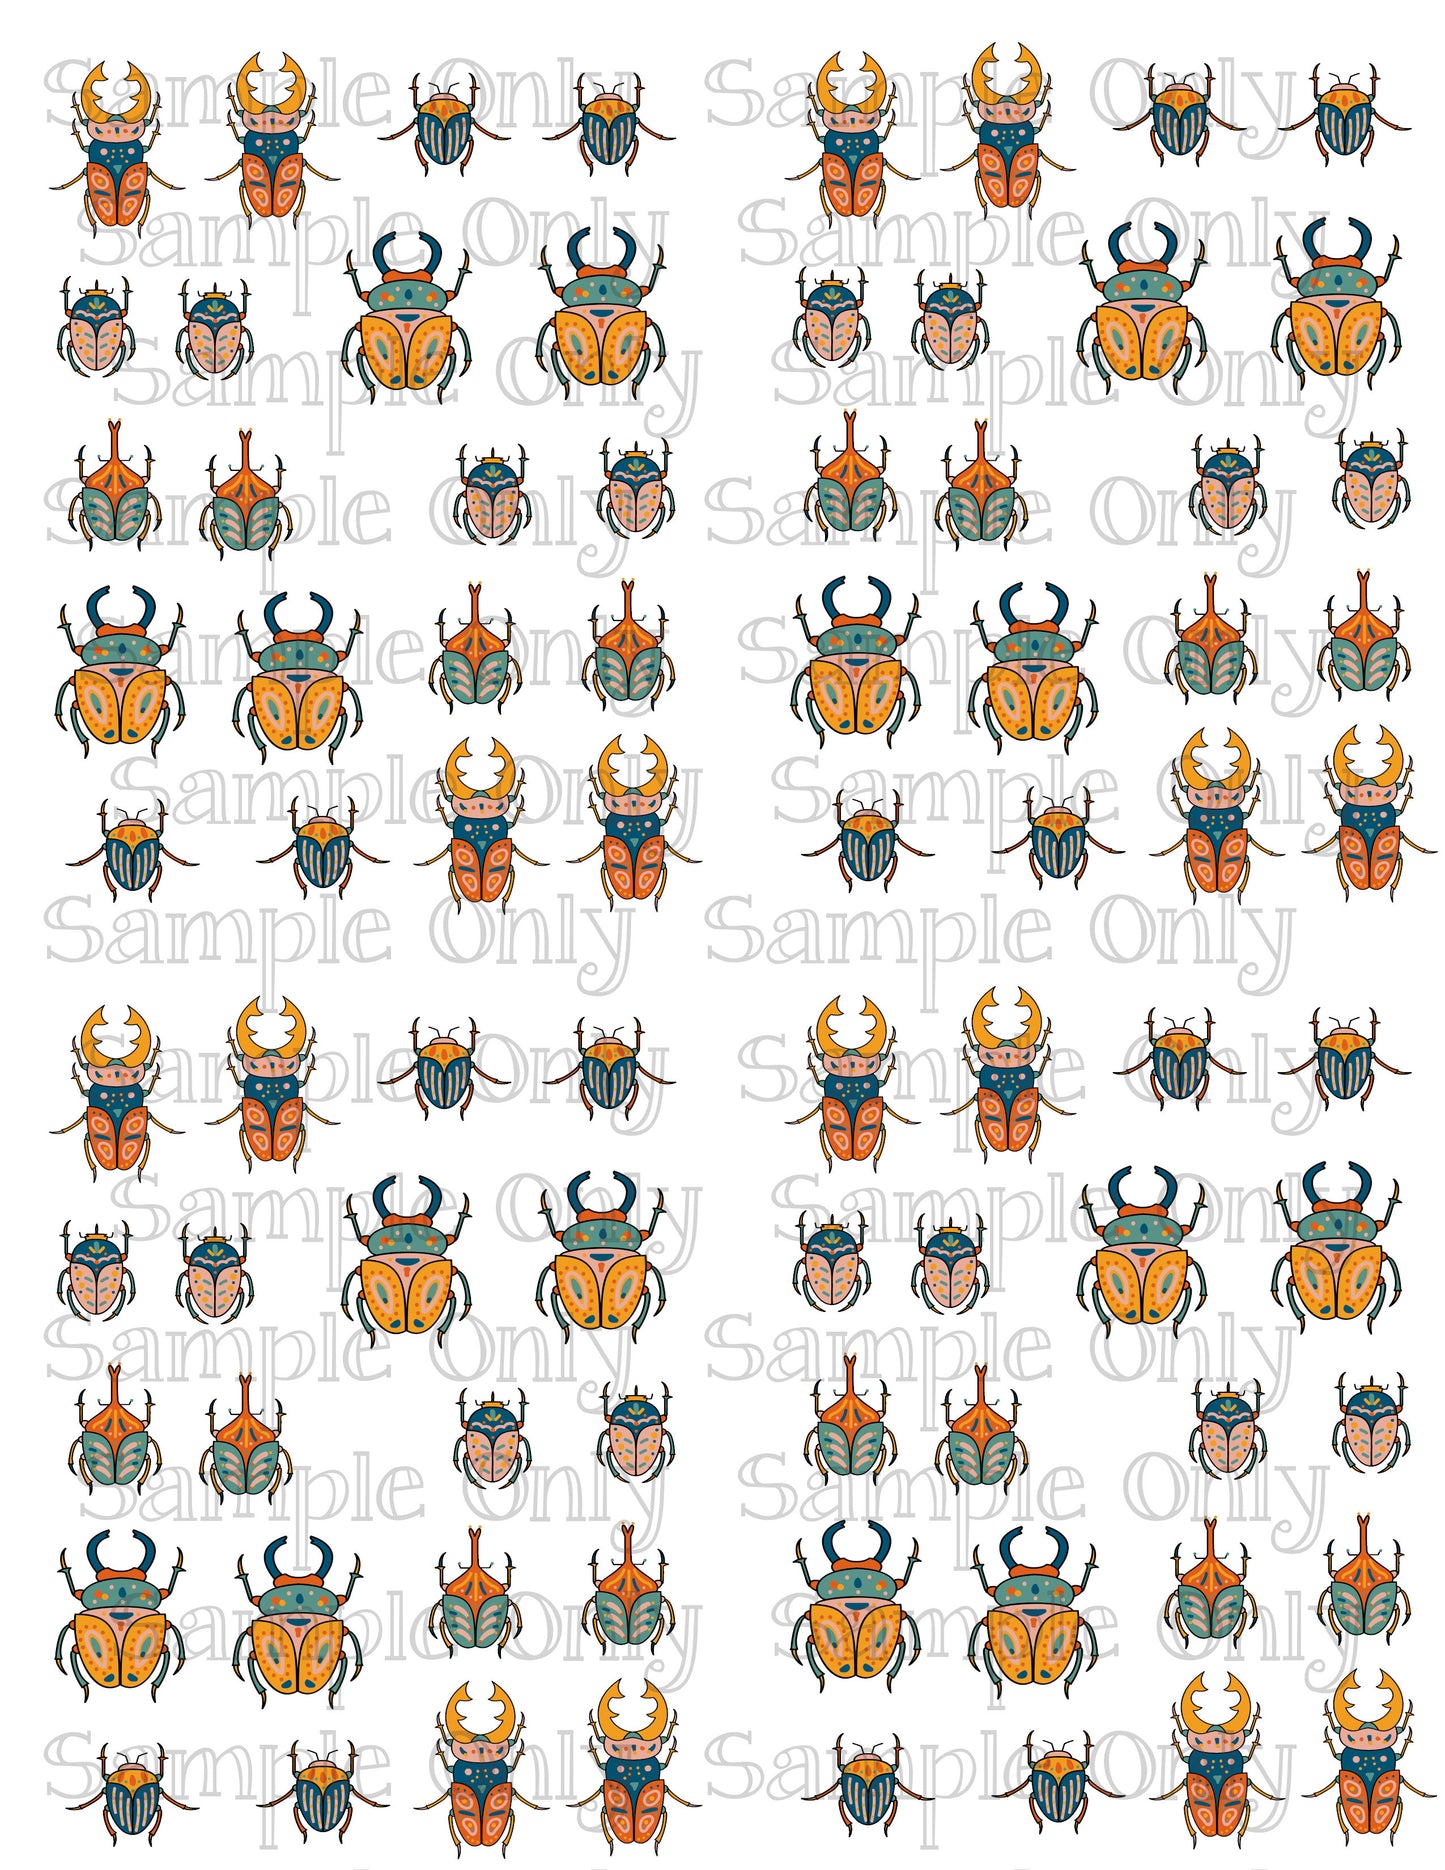 Boho Beetle Insects Image Sheet For Polymer Clay Transfer Decal DIGITAL FILE OR PRINTED